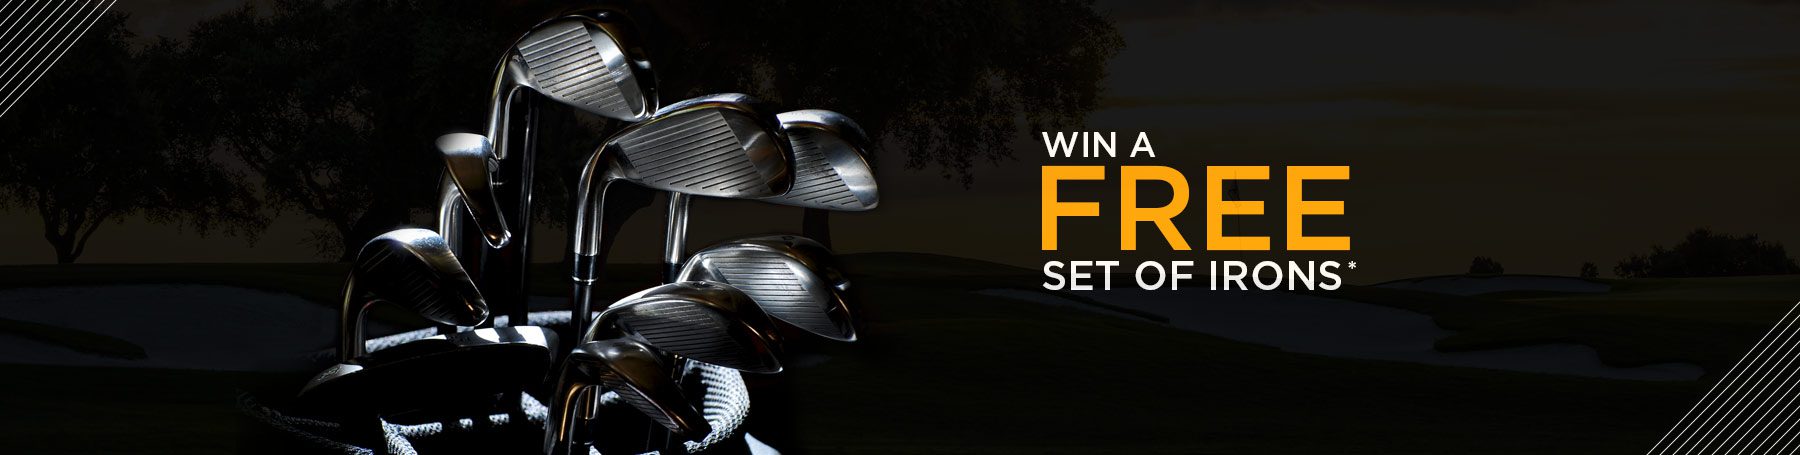 Win a Free Set of Irons